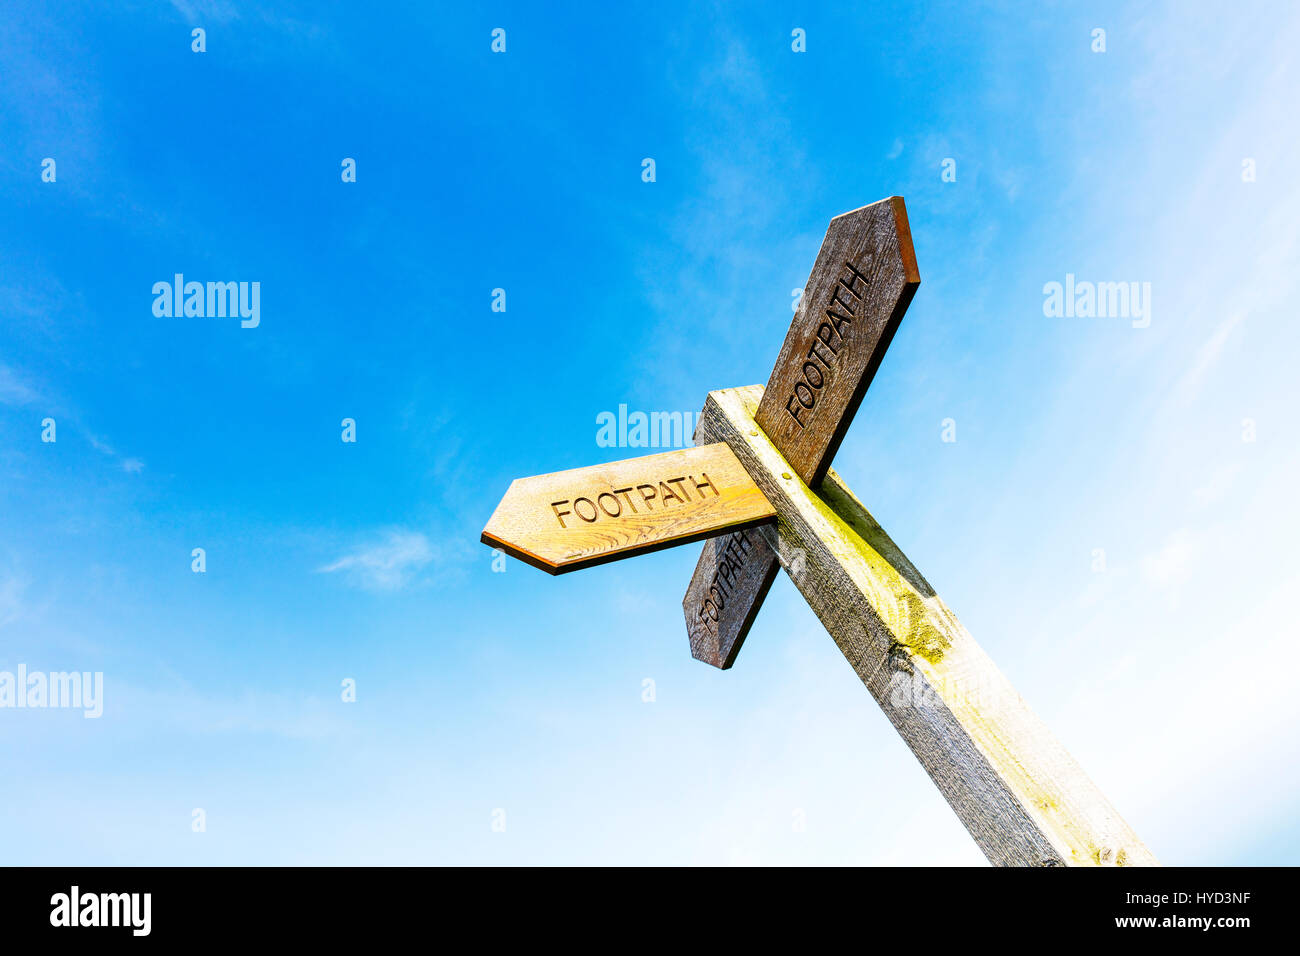 Footpath sign public footpath sign public footpath wooden sign post footpath directions sign copyspace copy space isolated sky background footpath UK Stock Photo